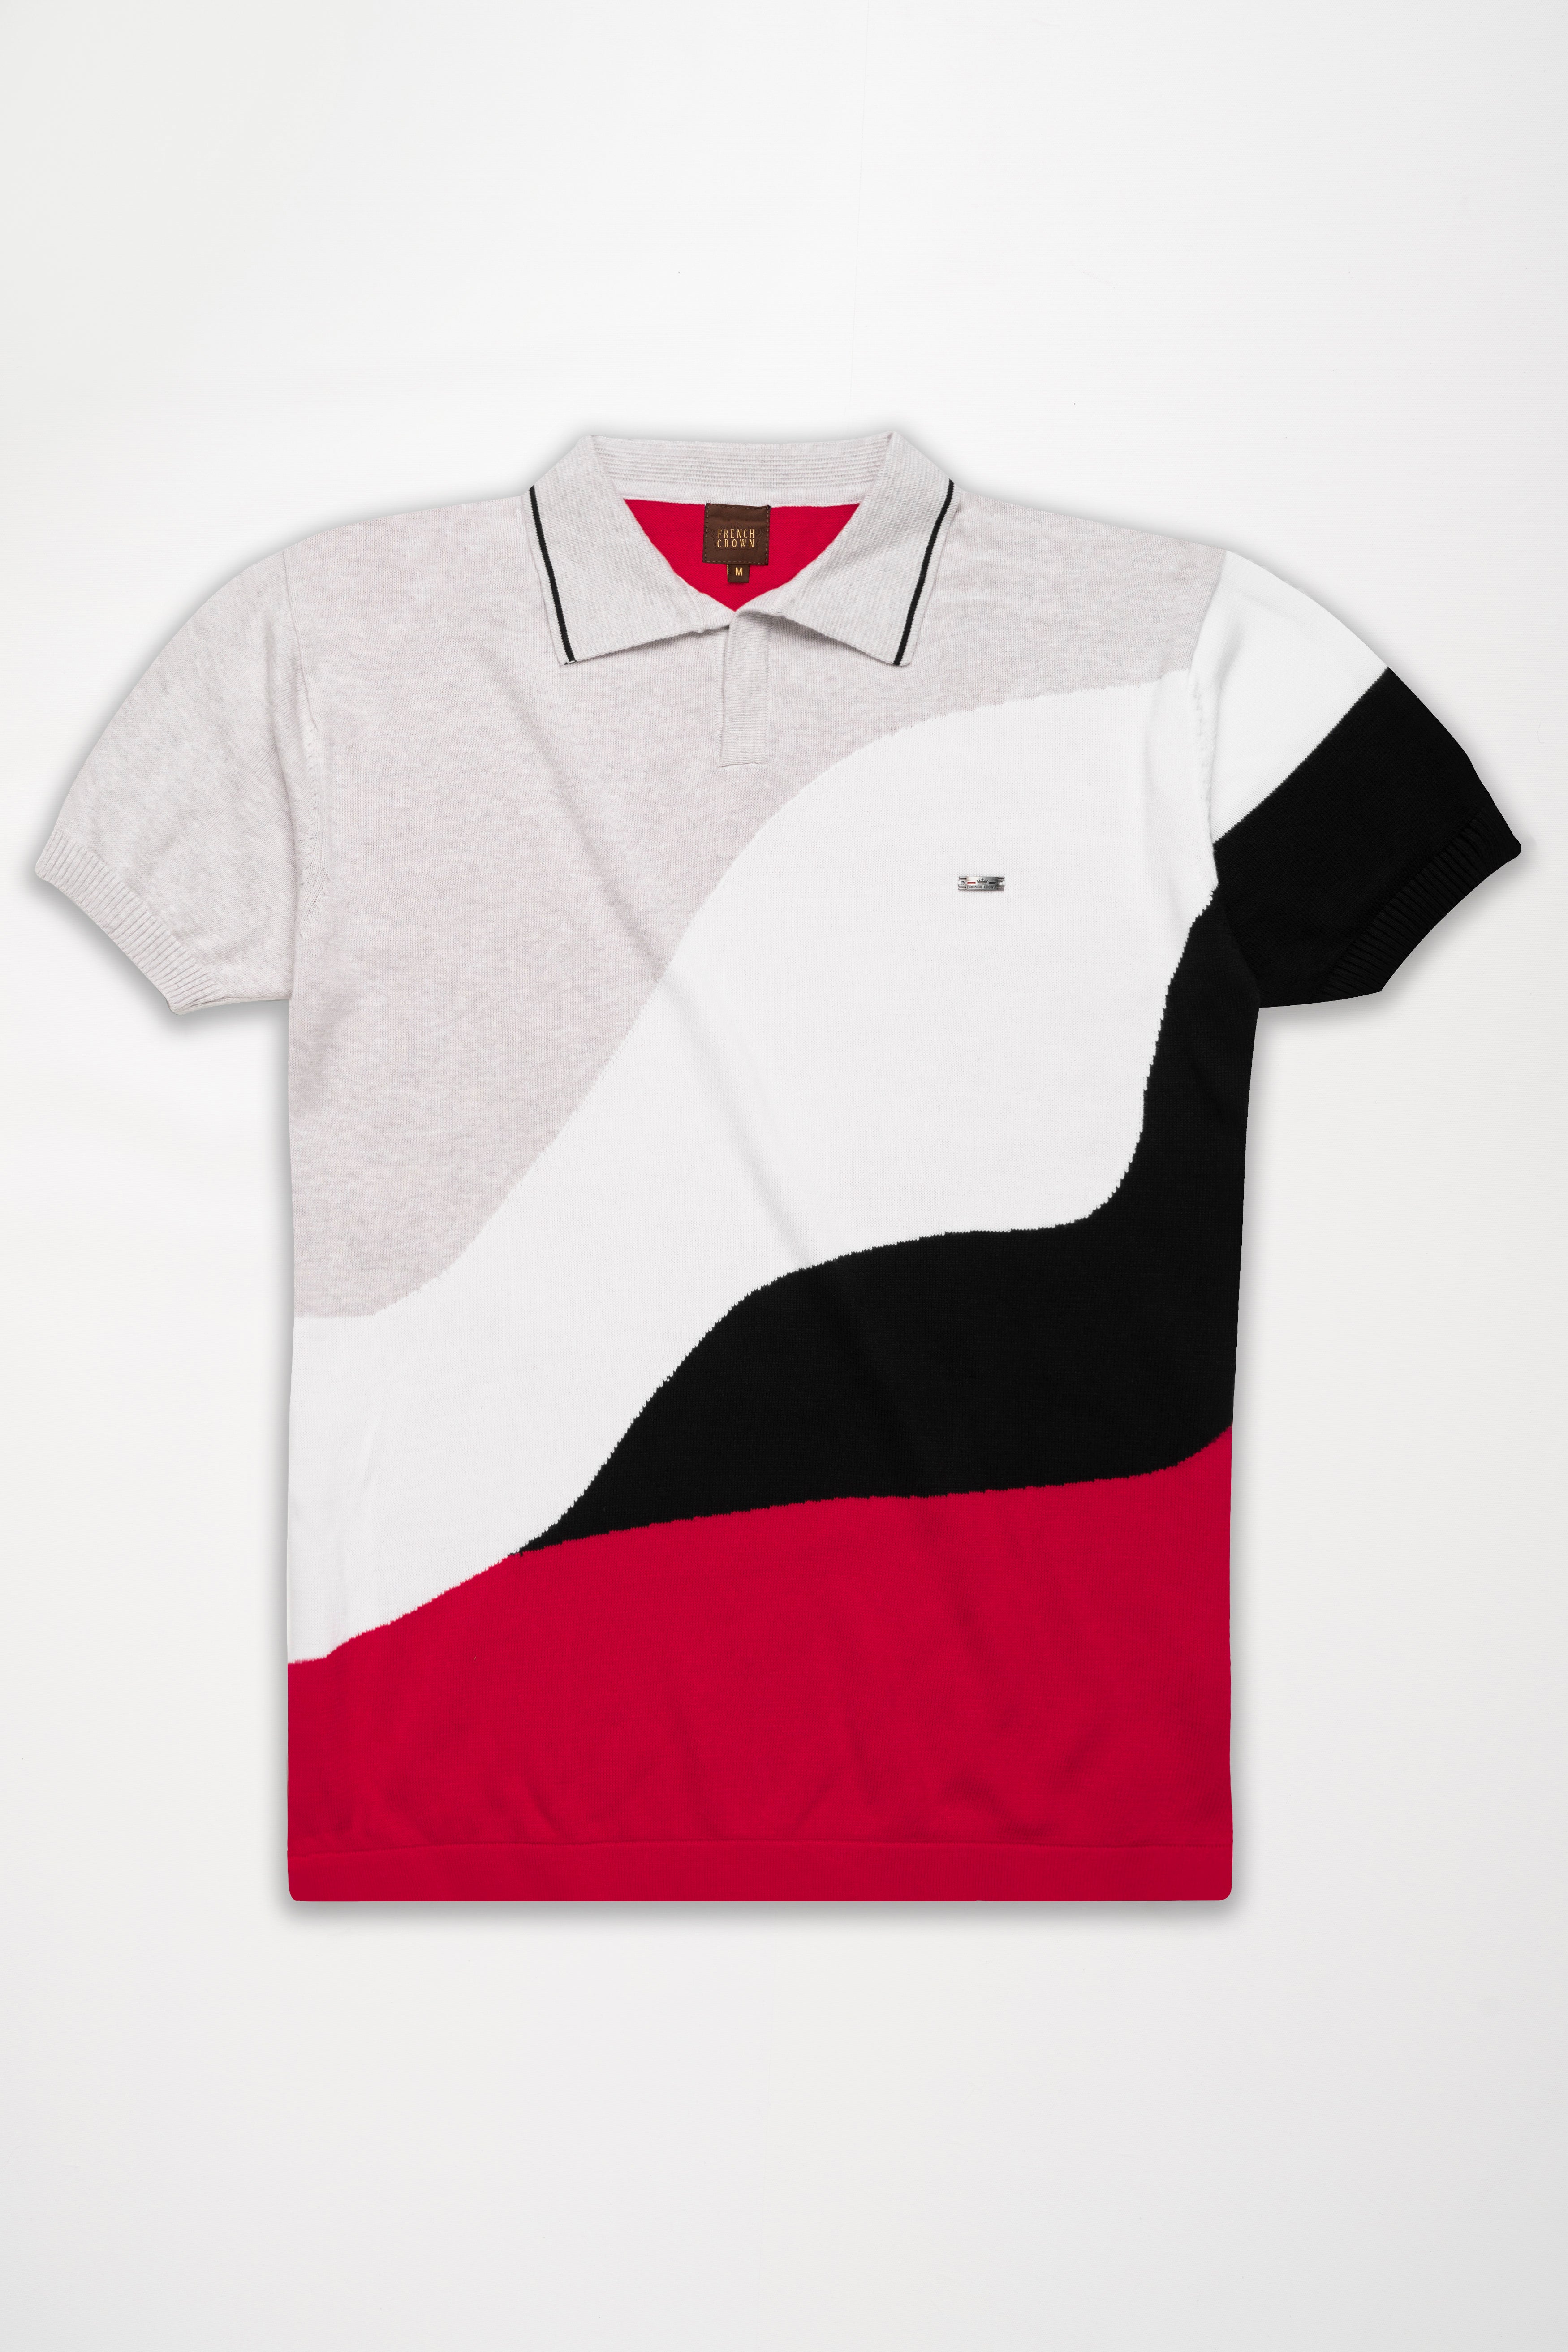 Geyser Gray with White and Black Premium Cotton Flat Knit Polo TS930-S, TS930-M, TS930-L, TS930-XL, TS930-XXL